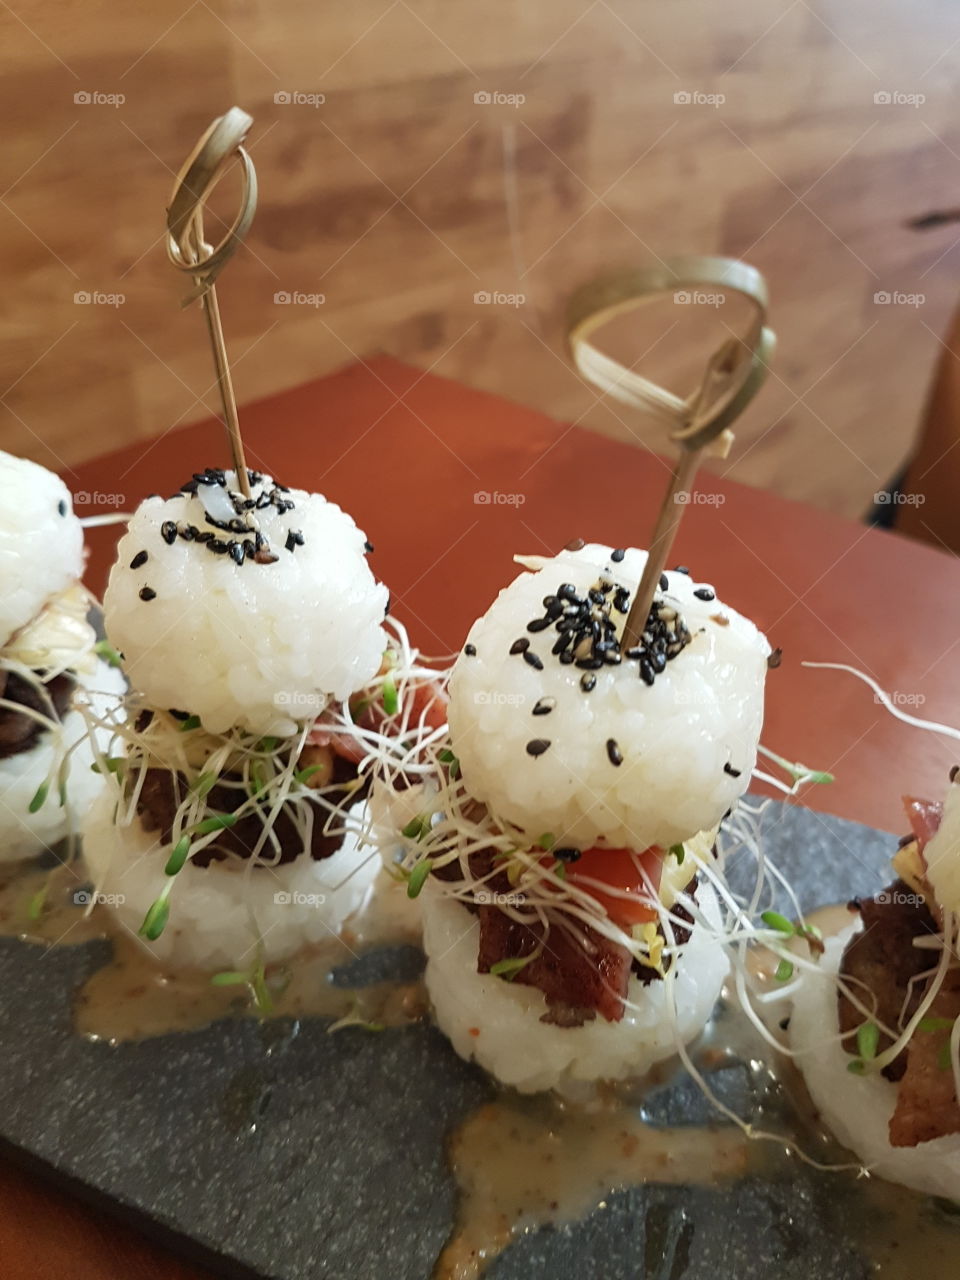 Sushi reinvented: truffled bacon cheeseburger sushi with alfalfa sprouts and truffle oil sesame sauce